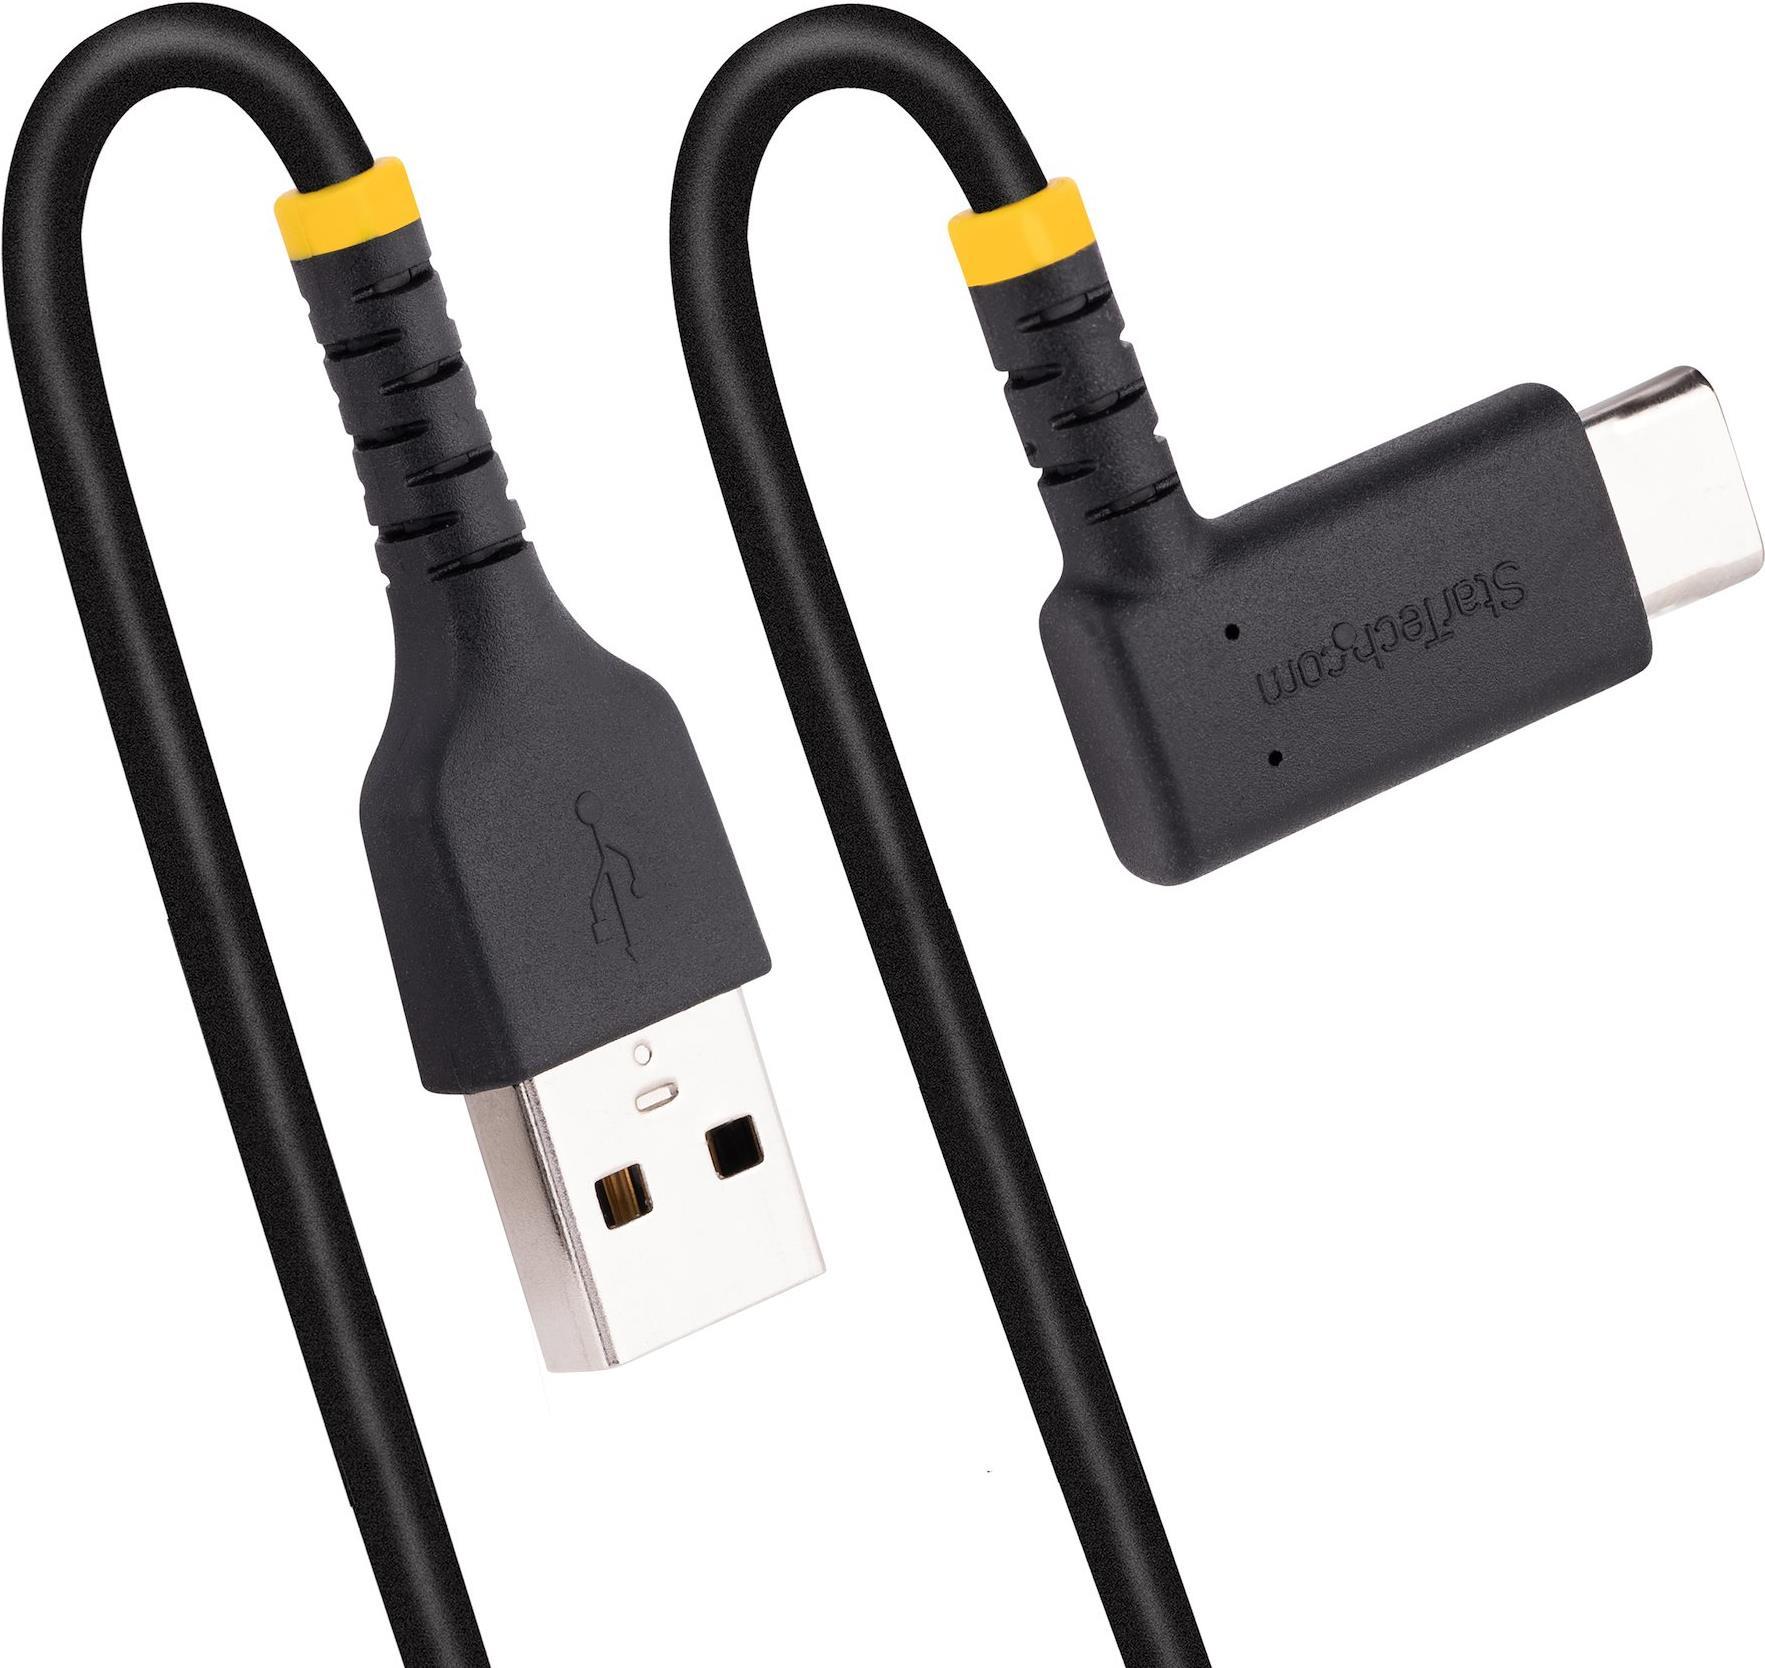 StarTech.com 6ft (2m) USB A to C Charging Cable Right Angle, Heavy Duty Fast Charge USB-C Cable, USB 2.0 A to Type-C, Durable and Rugged Aramid Fiber, 3A, S20/iPad/Pixel - High Quality USB Charging Cord (R2ACR-2M-USB-CABLE) - USB-Kabel - USB (M) gerade zu USB-C (M) rechtwinklig - Thunderbolt 3 / USB 2.0 - 3 A - 2 m - USB Power Delivery (60W) - Schwarz von Startech